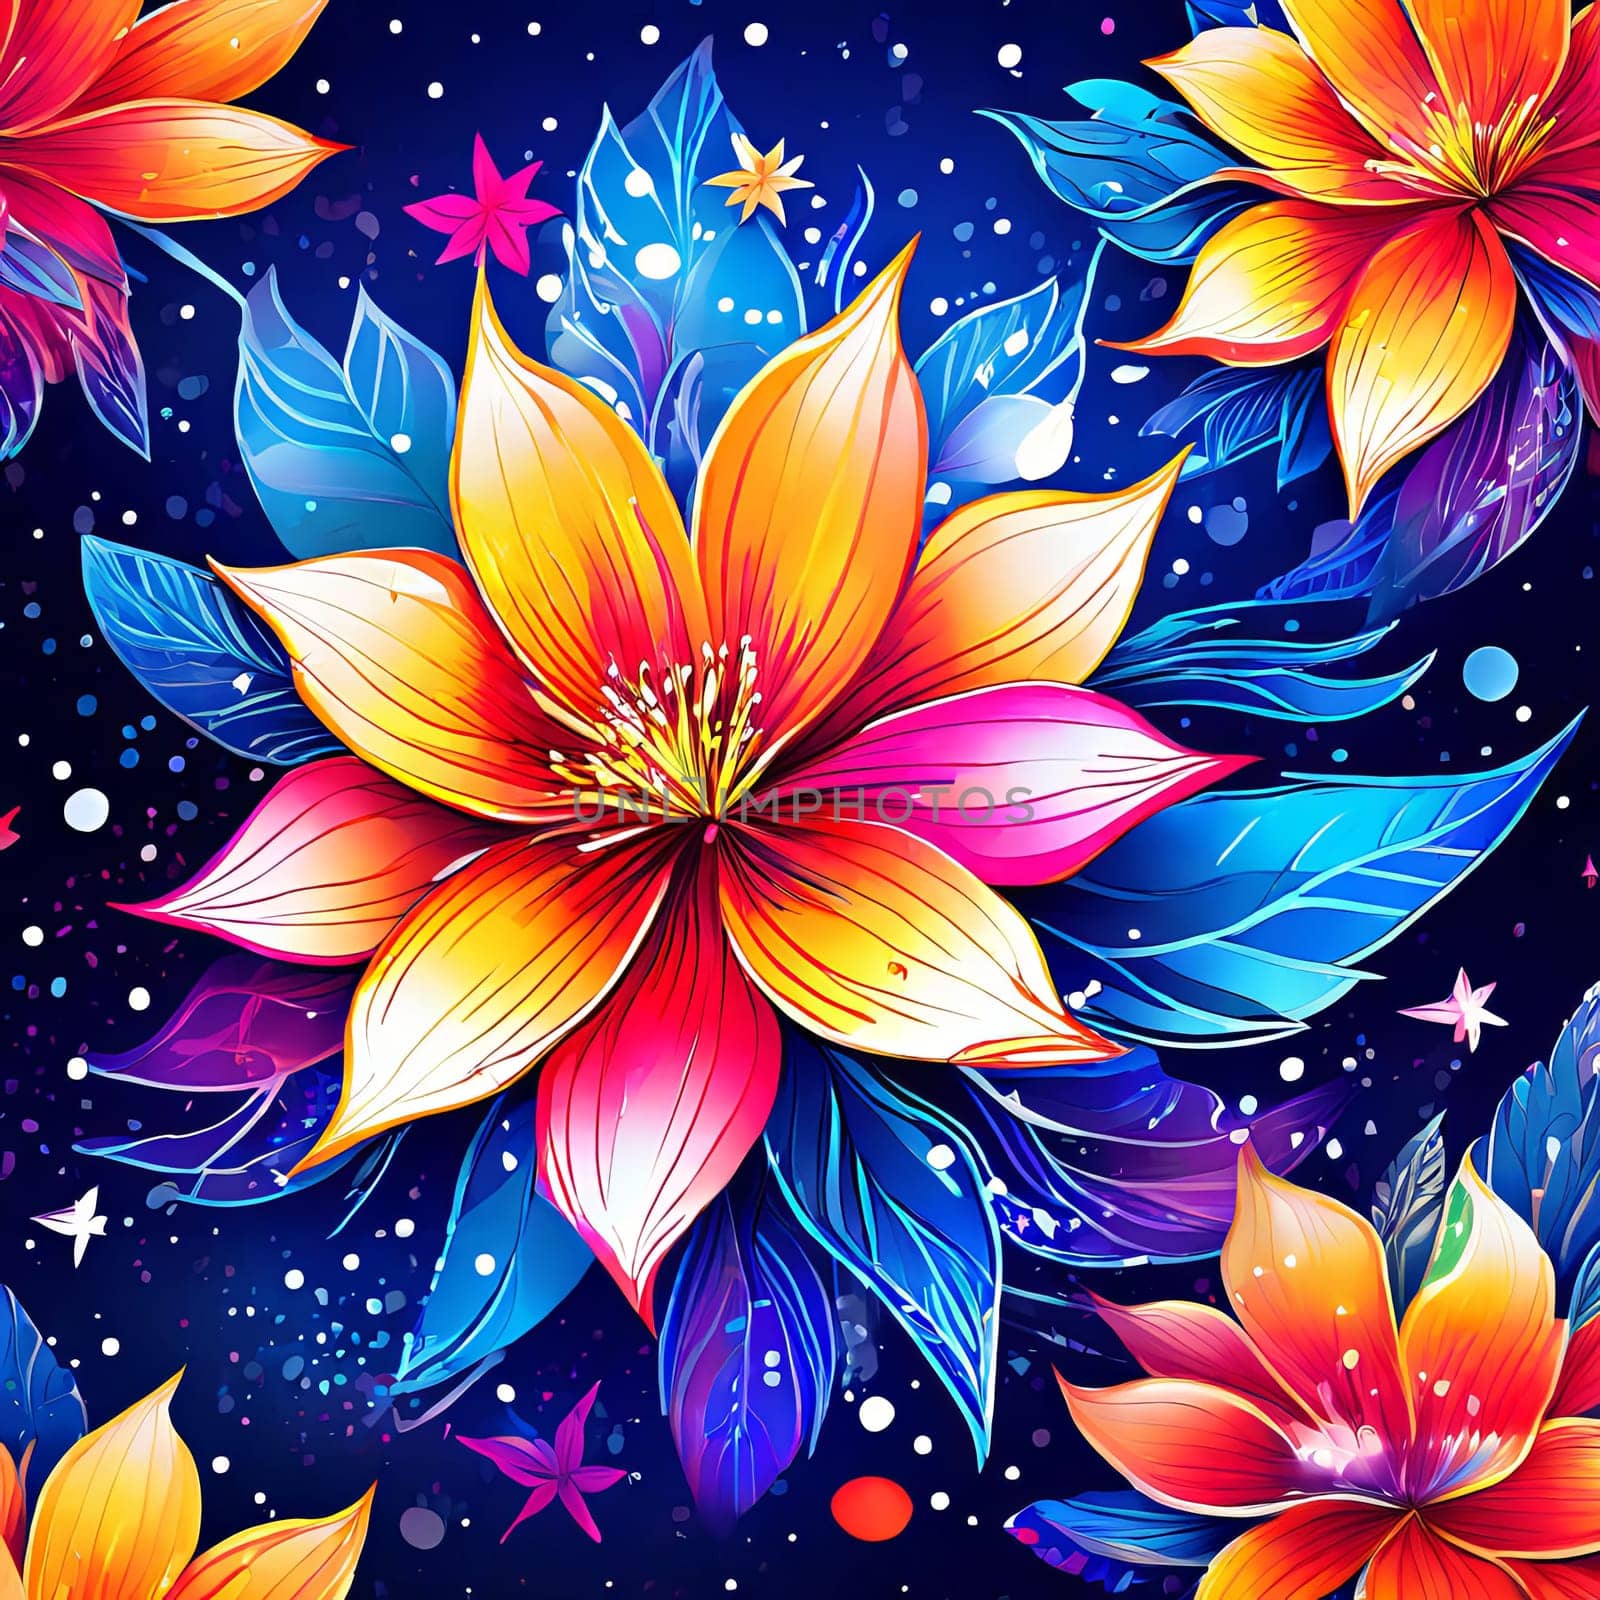 Serene lotus flowers on blue background adorned with stars. Starry background adds sense of mystery, magic to overall impression of image. For art, creative projects, fashion, style, social media. by Angelsmoon